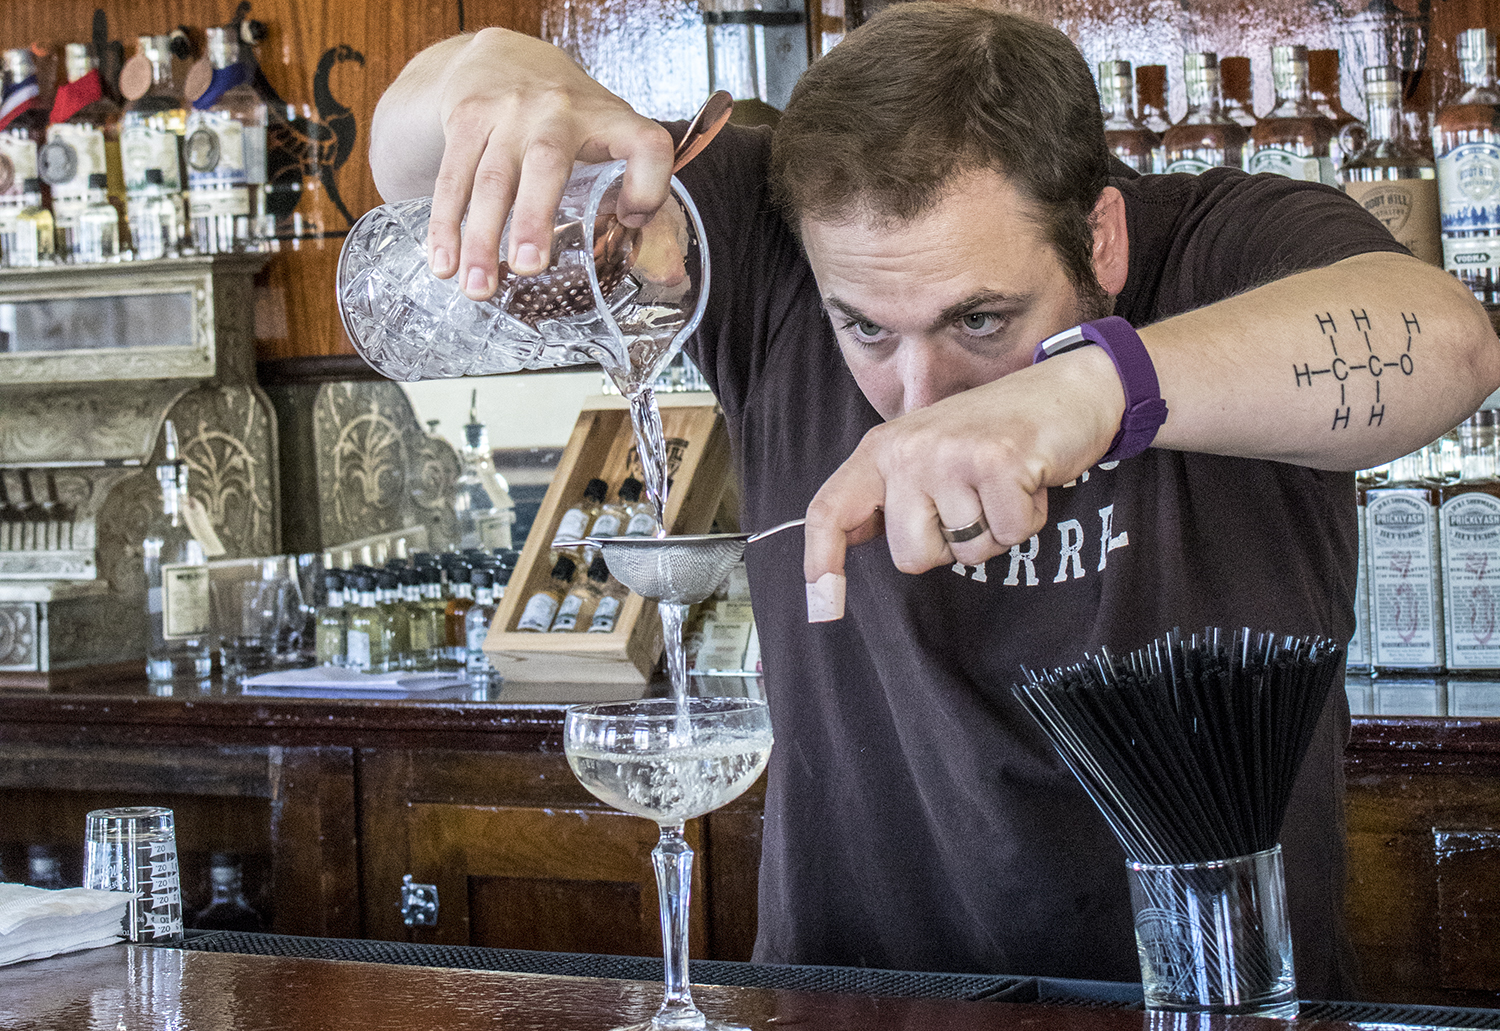 Mark A. Vierthaler pours a cocktail inside The Tasting Room